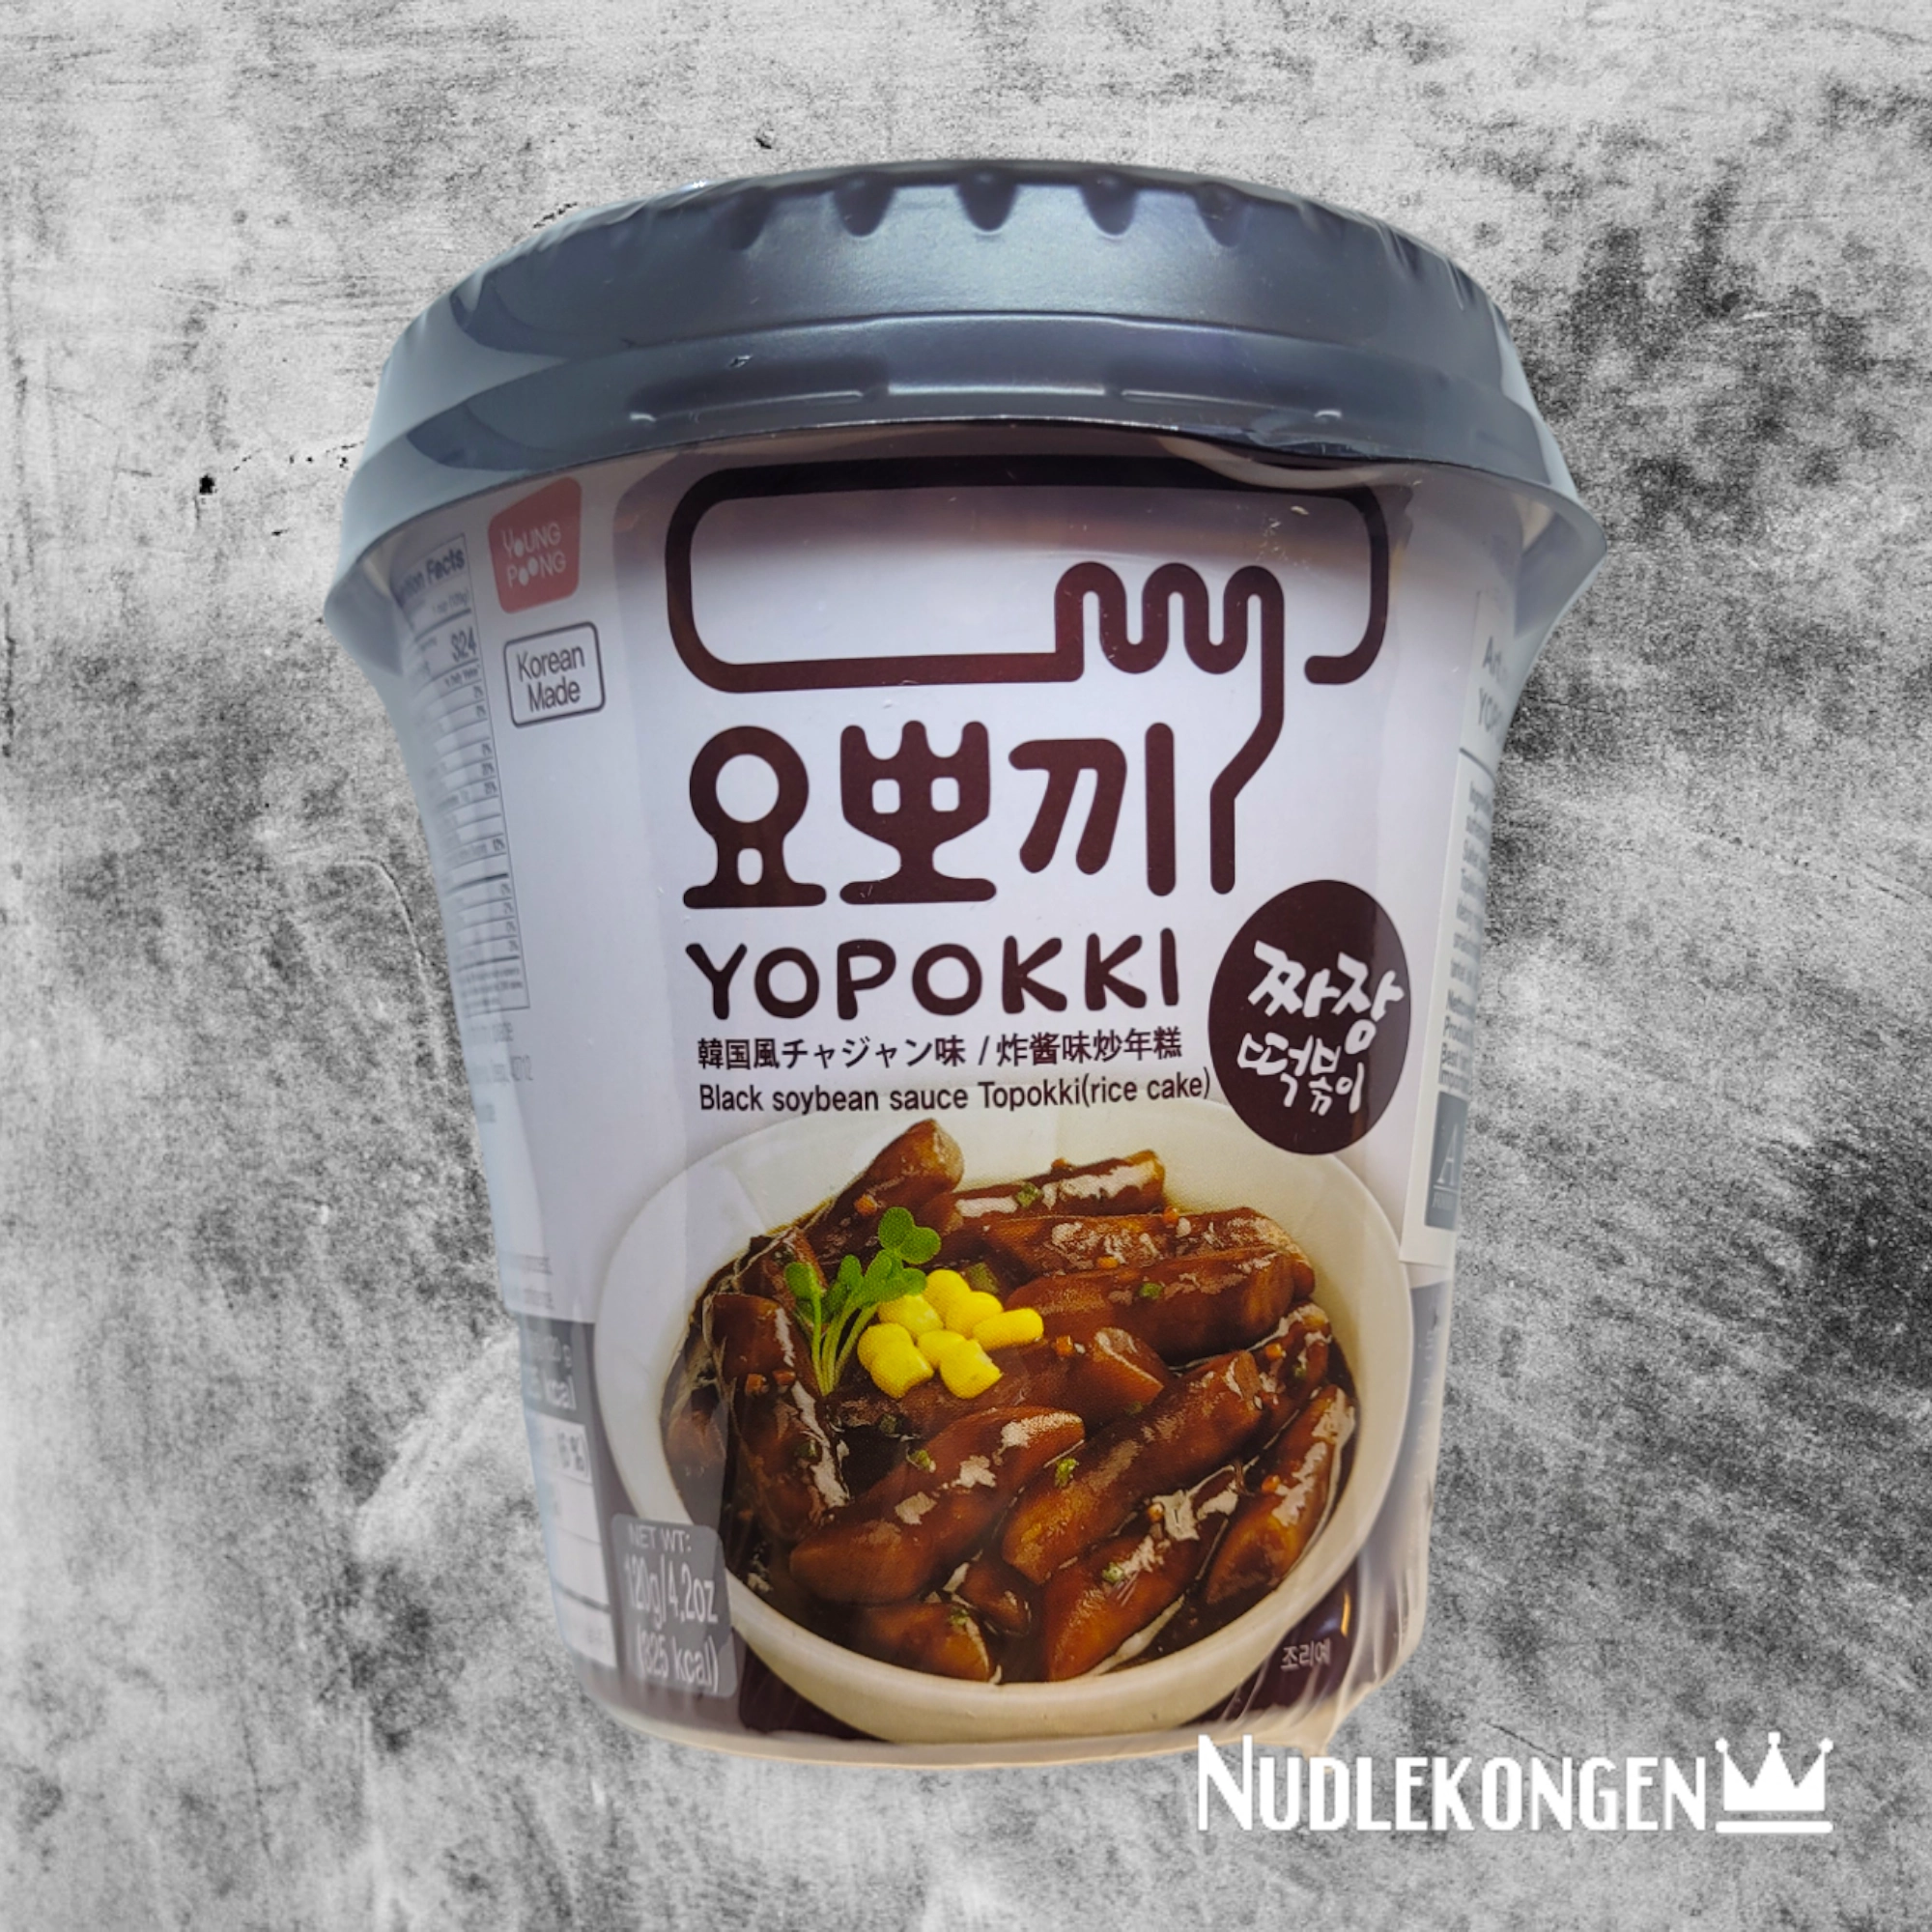 INST. TOPOKKI IN BLACK SOYBEAN SAUCE (CUP)